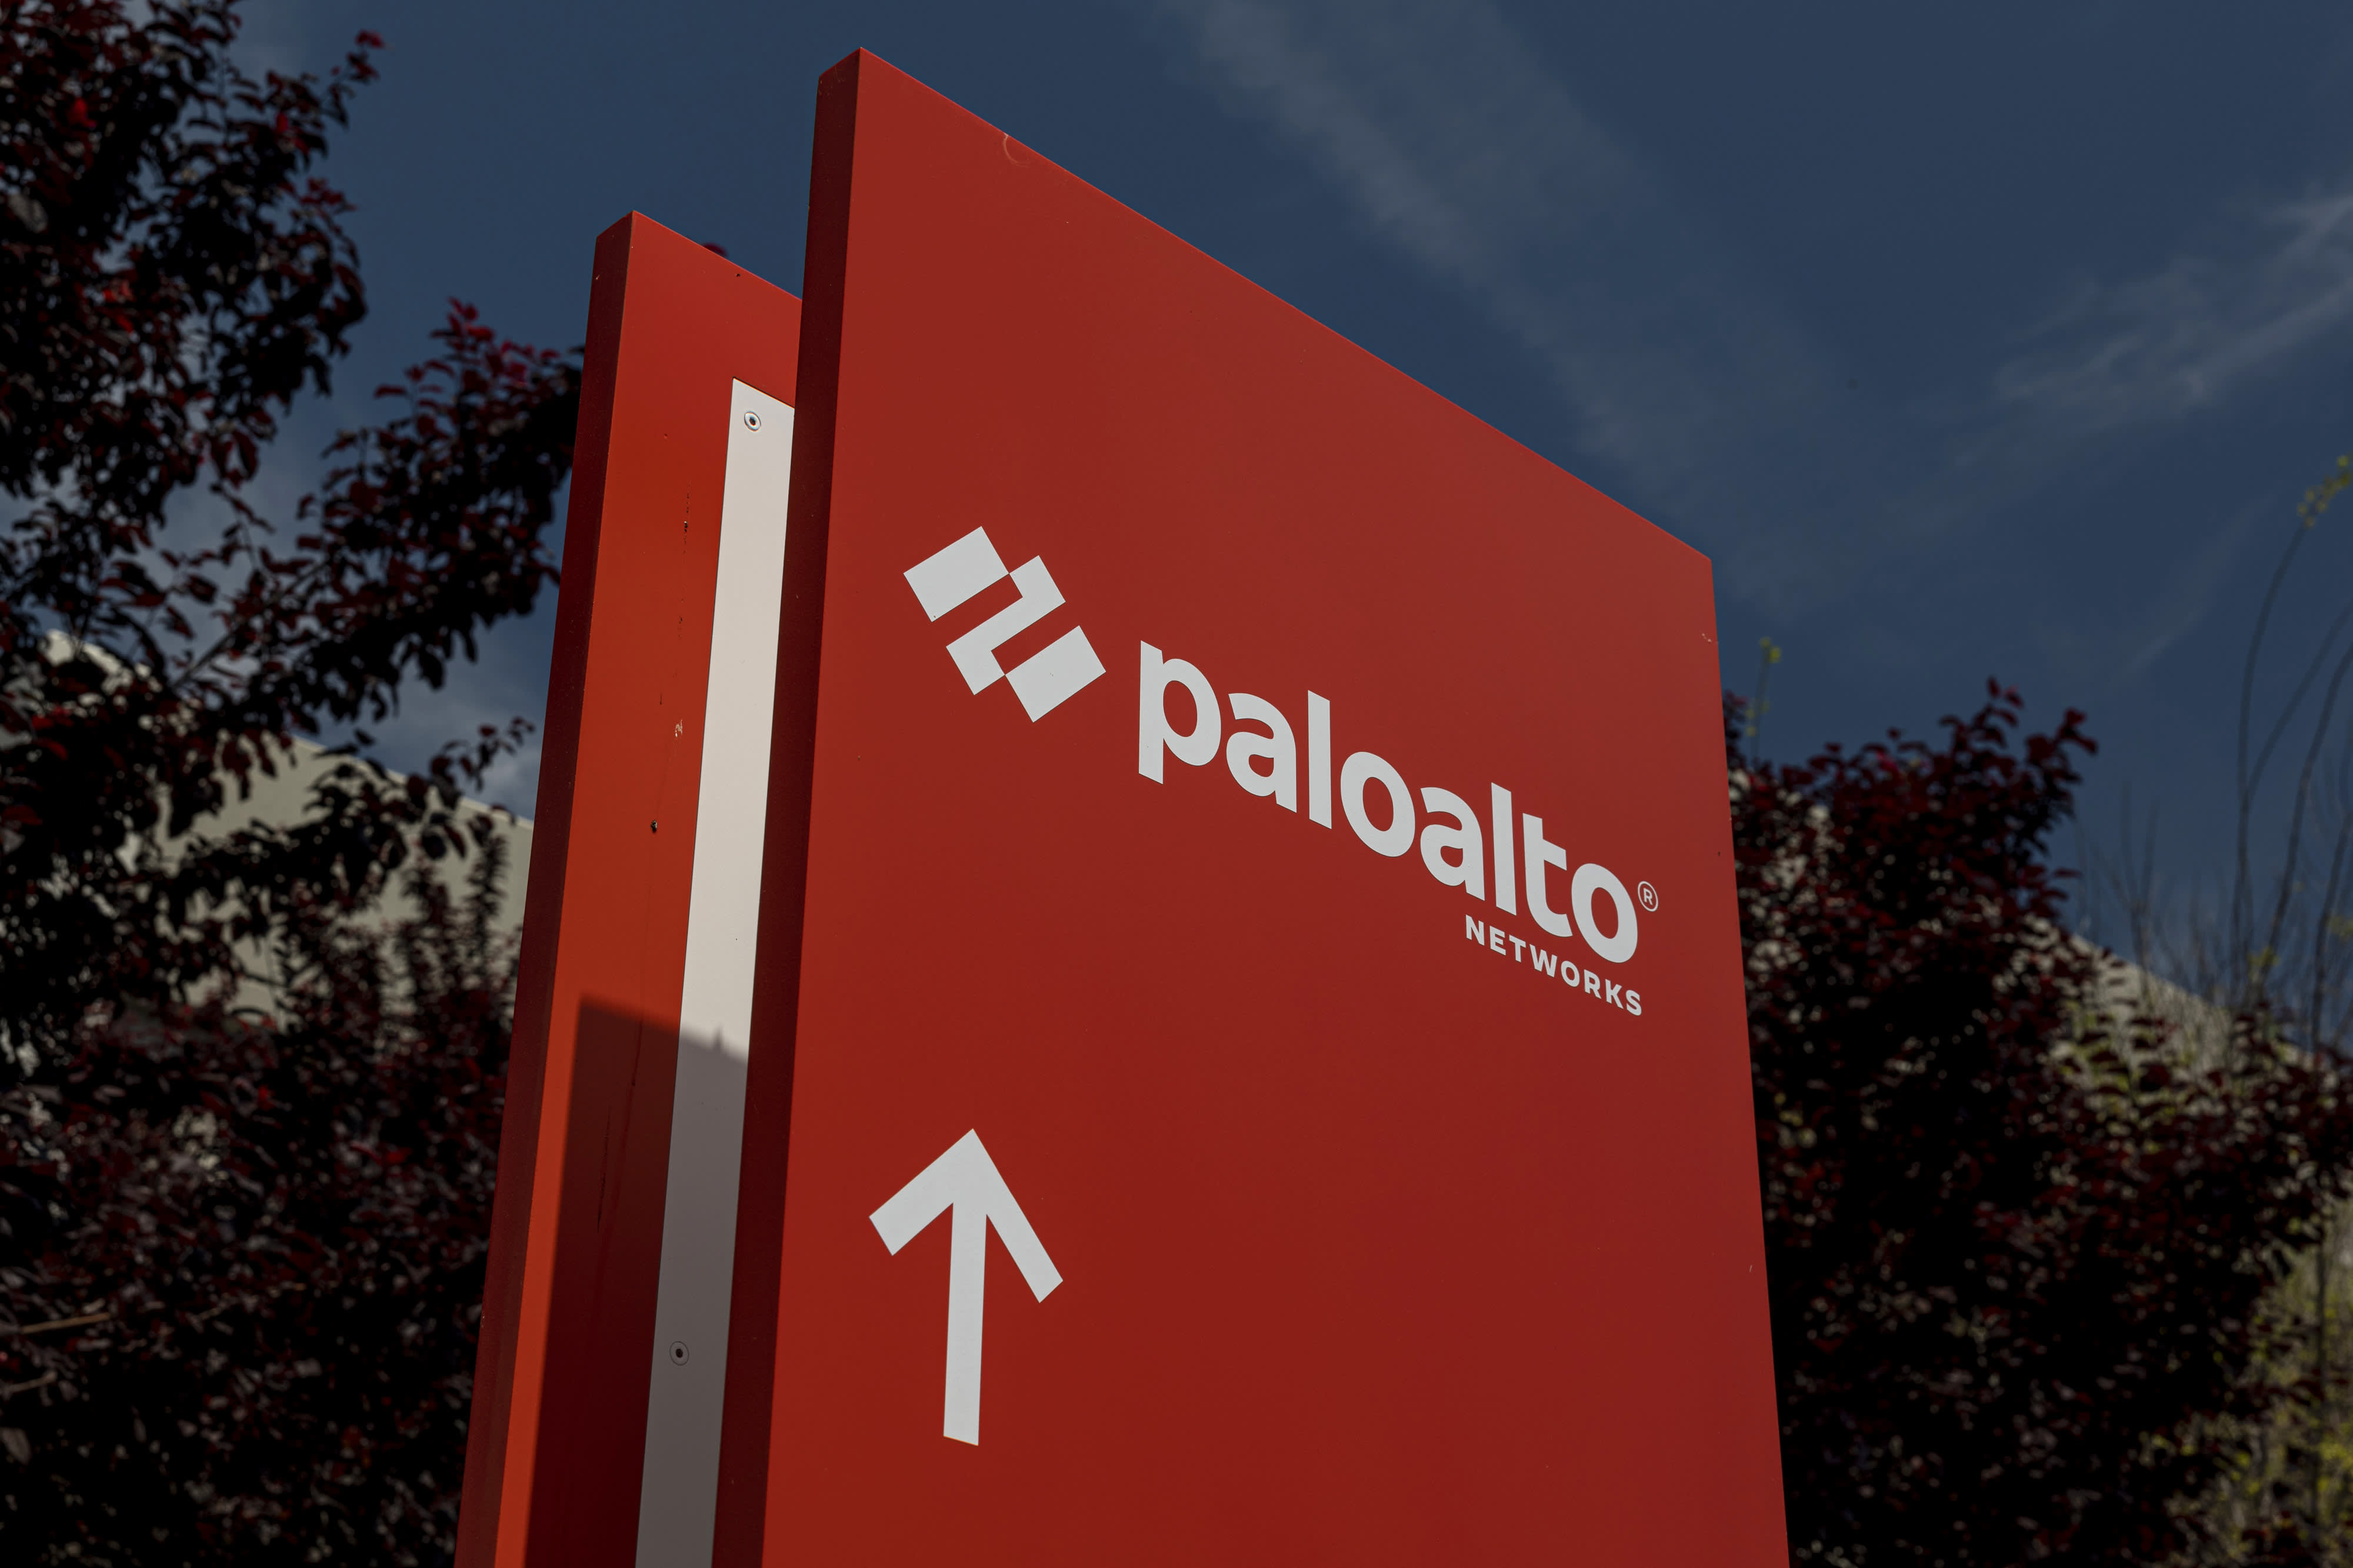 Jim Cramer gauges the threat of Microsoft's cybersecurity foray on Palo Alto Networks stock